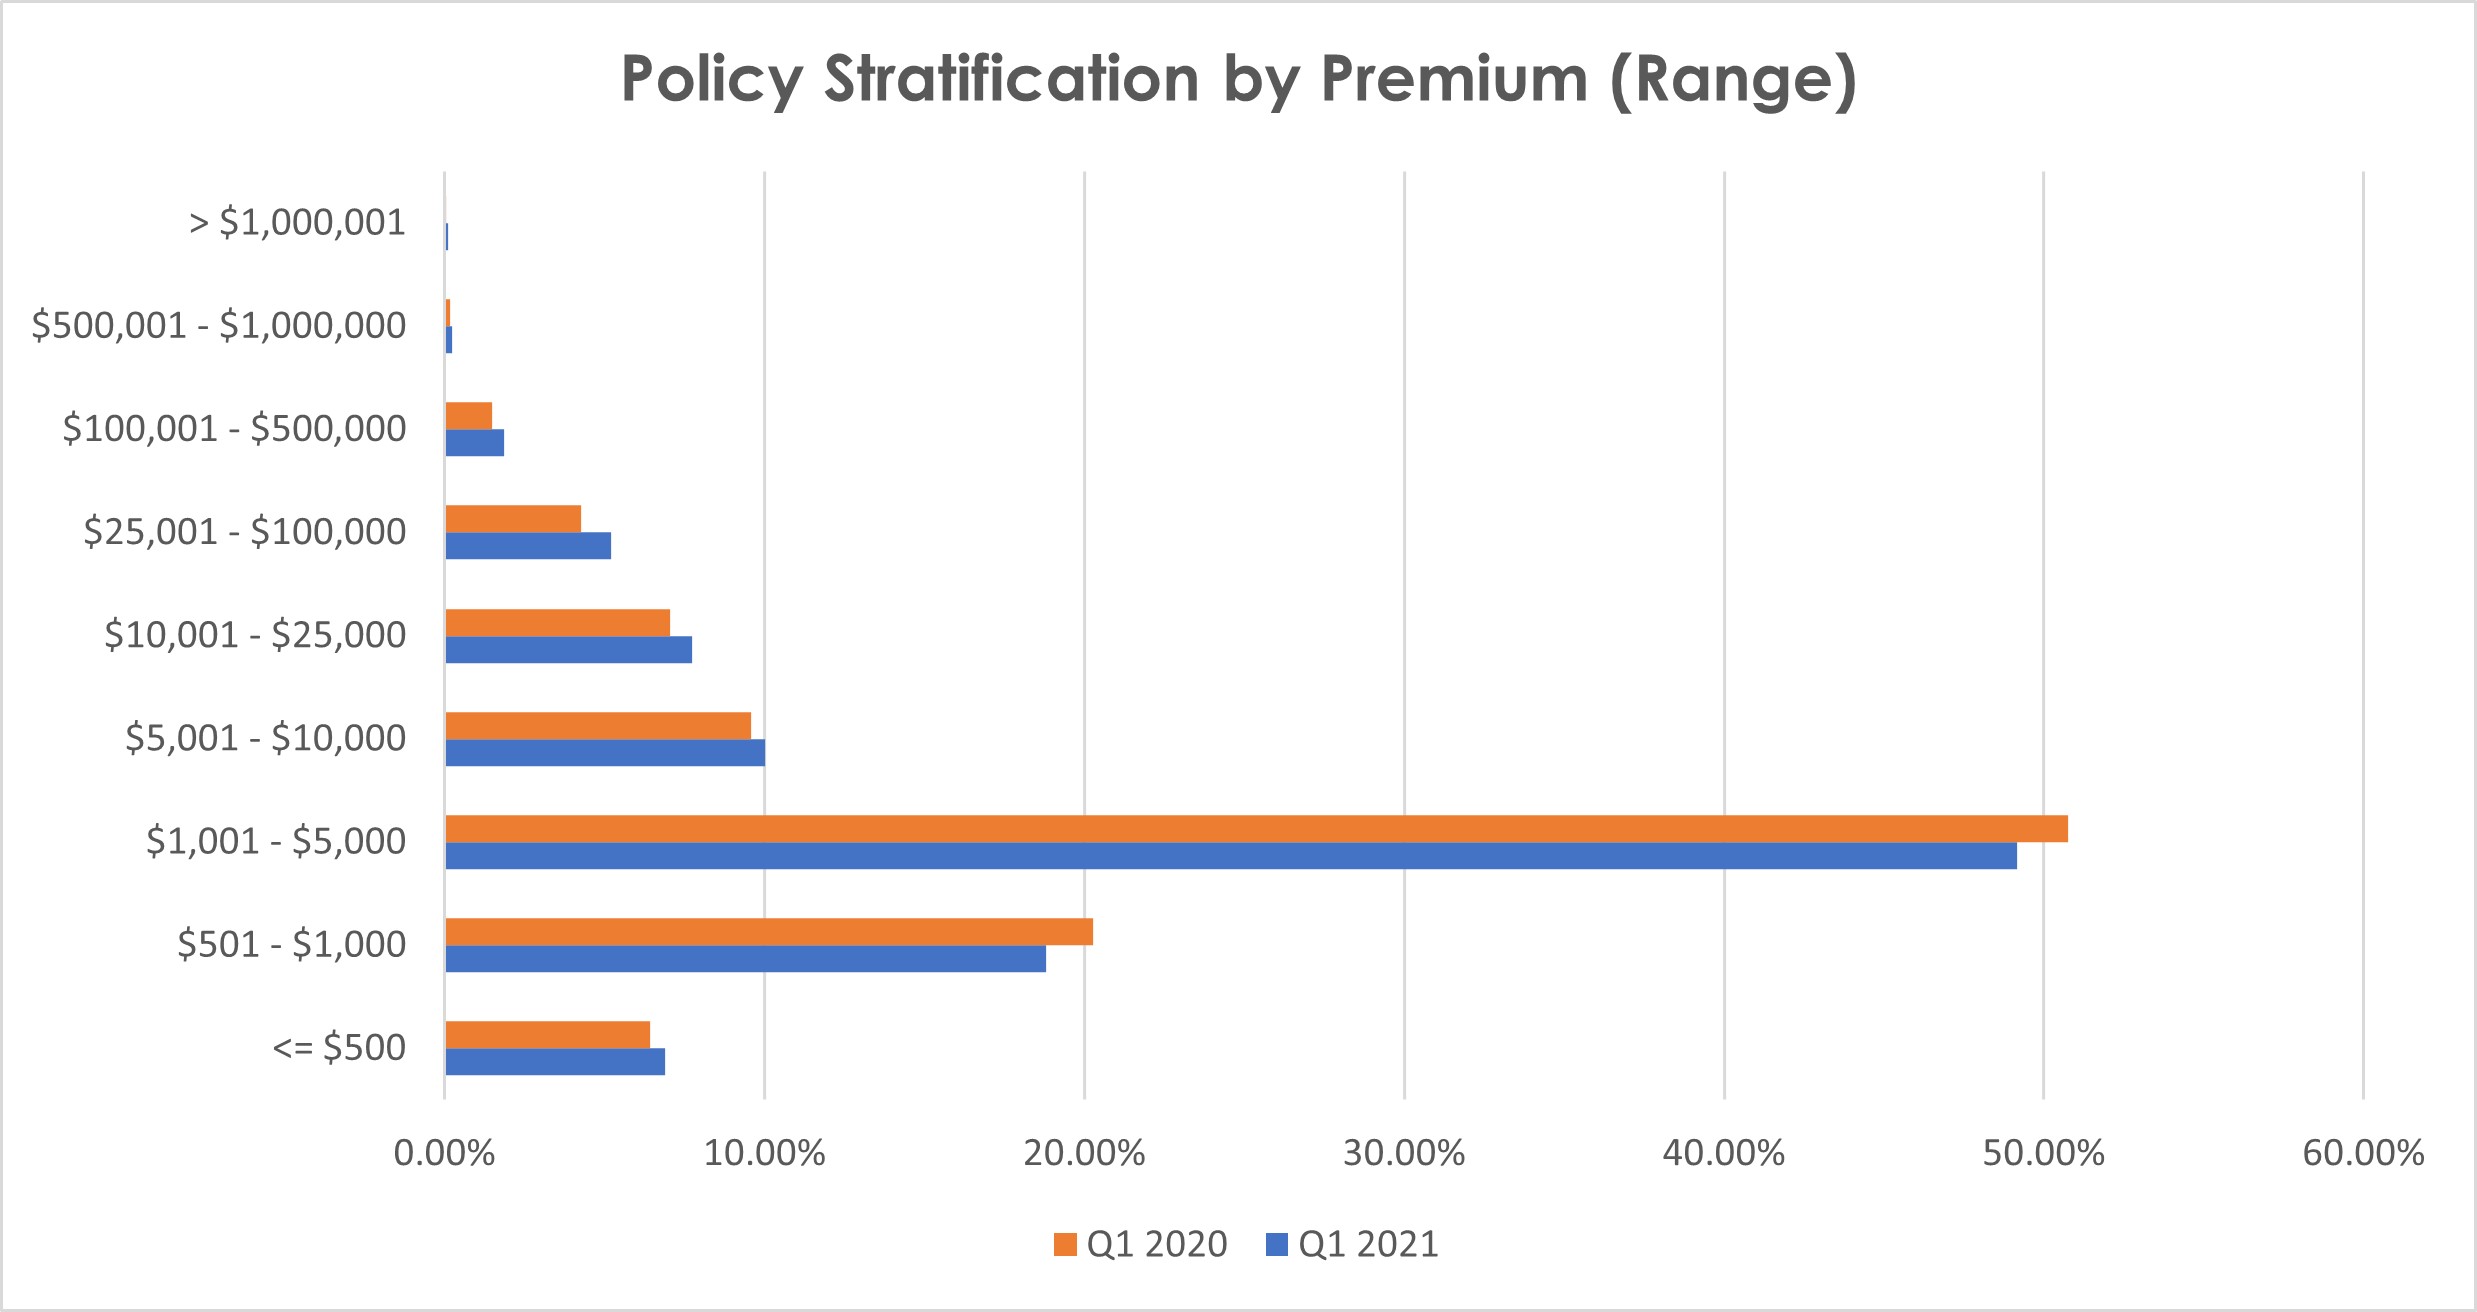 Policy Stratification by Premium